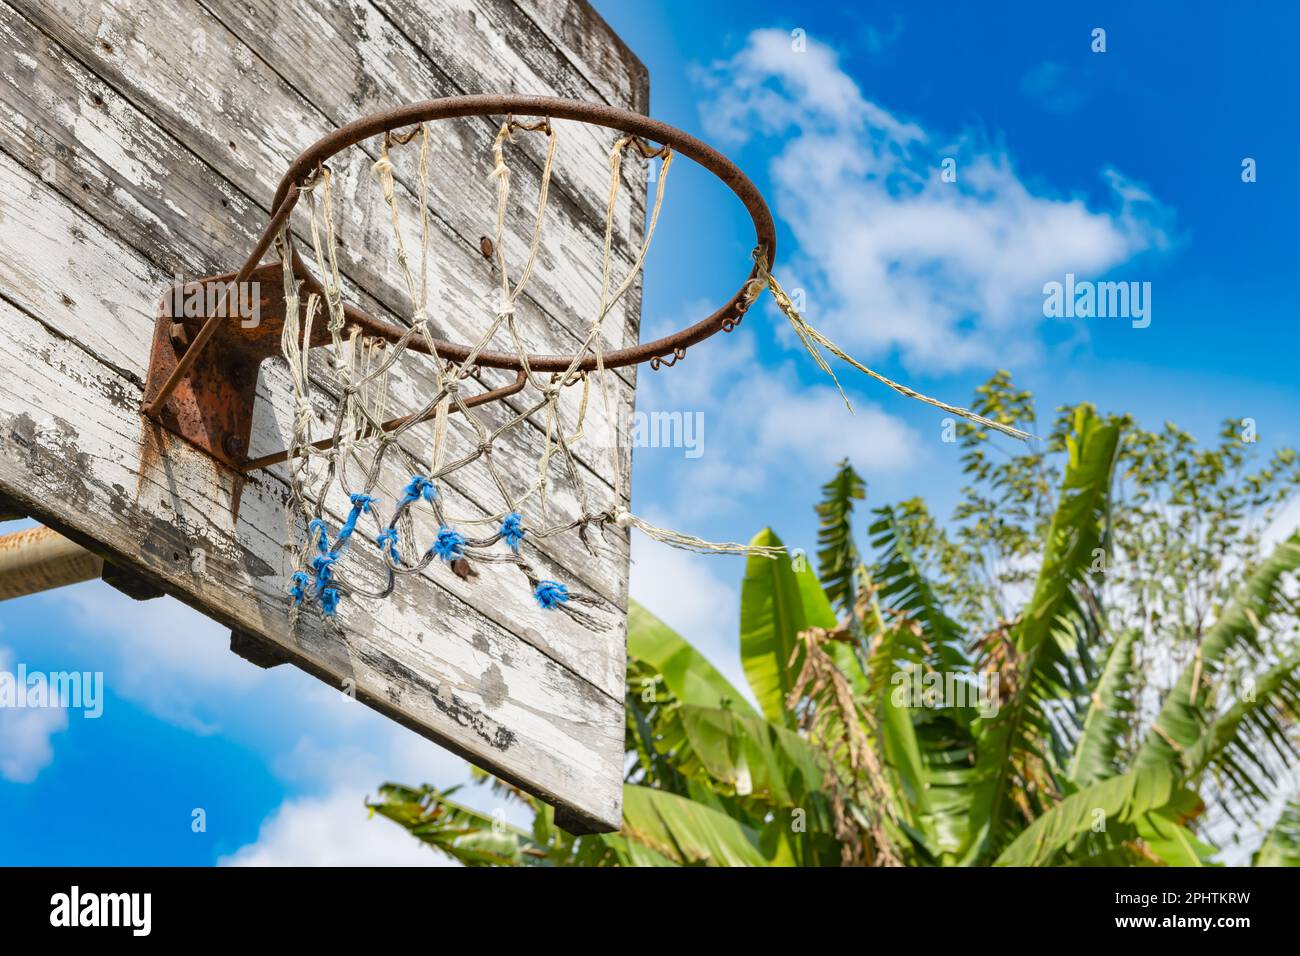 angle view basketball hoop and board under the blue sky horizontal composition Stock Photo